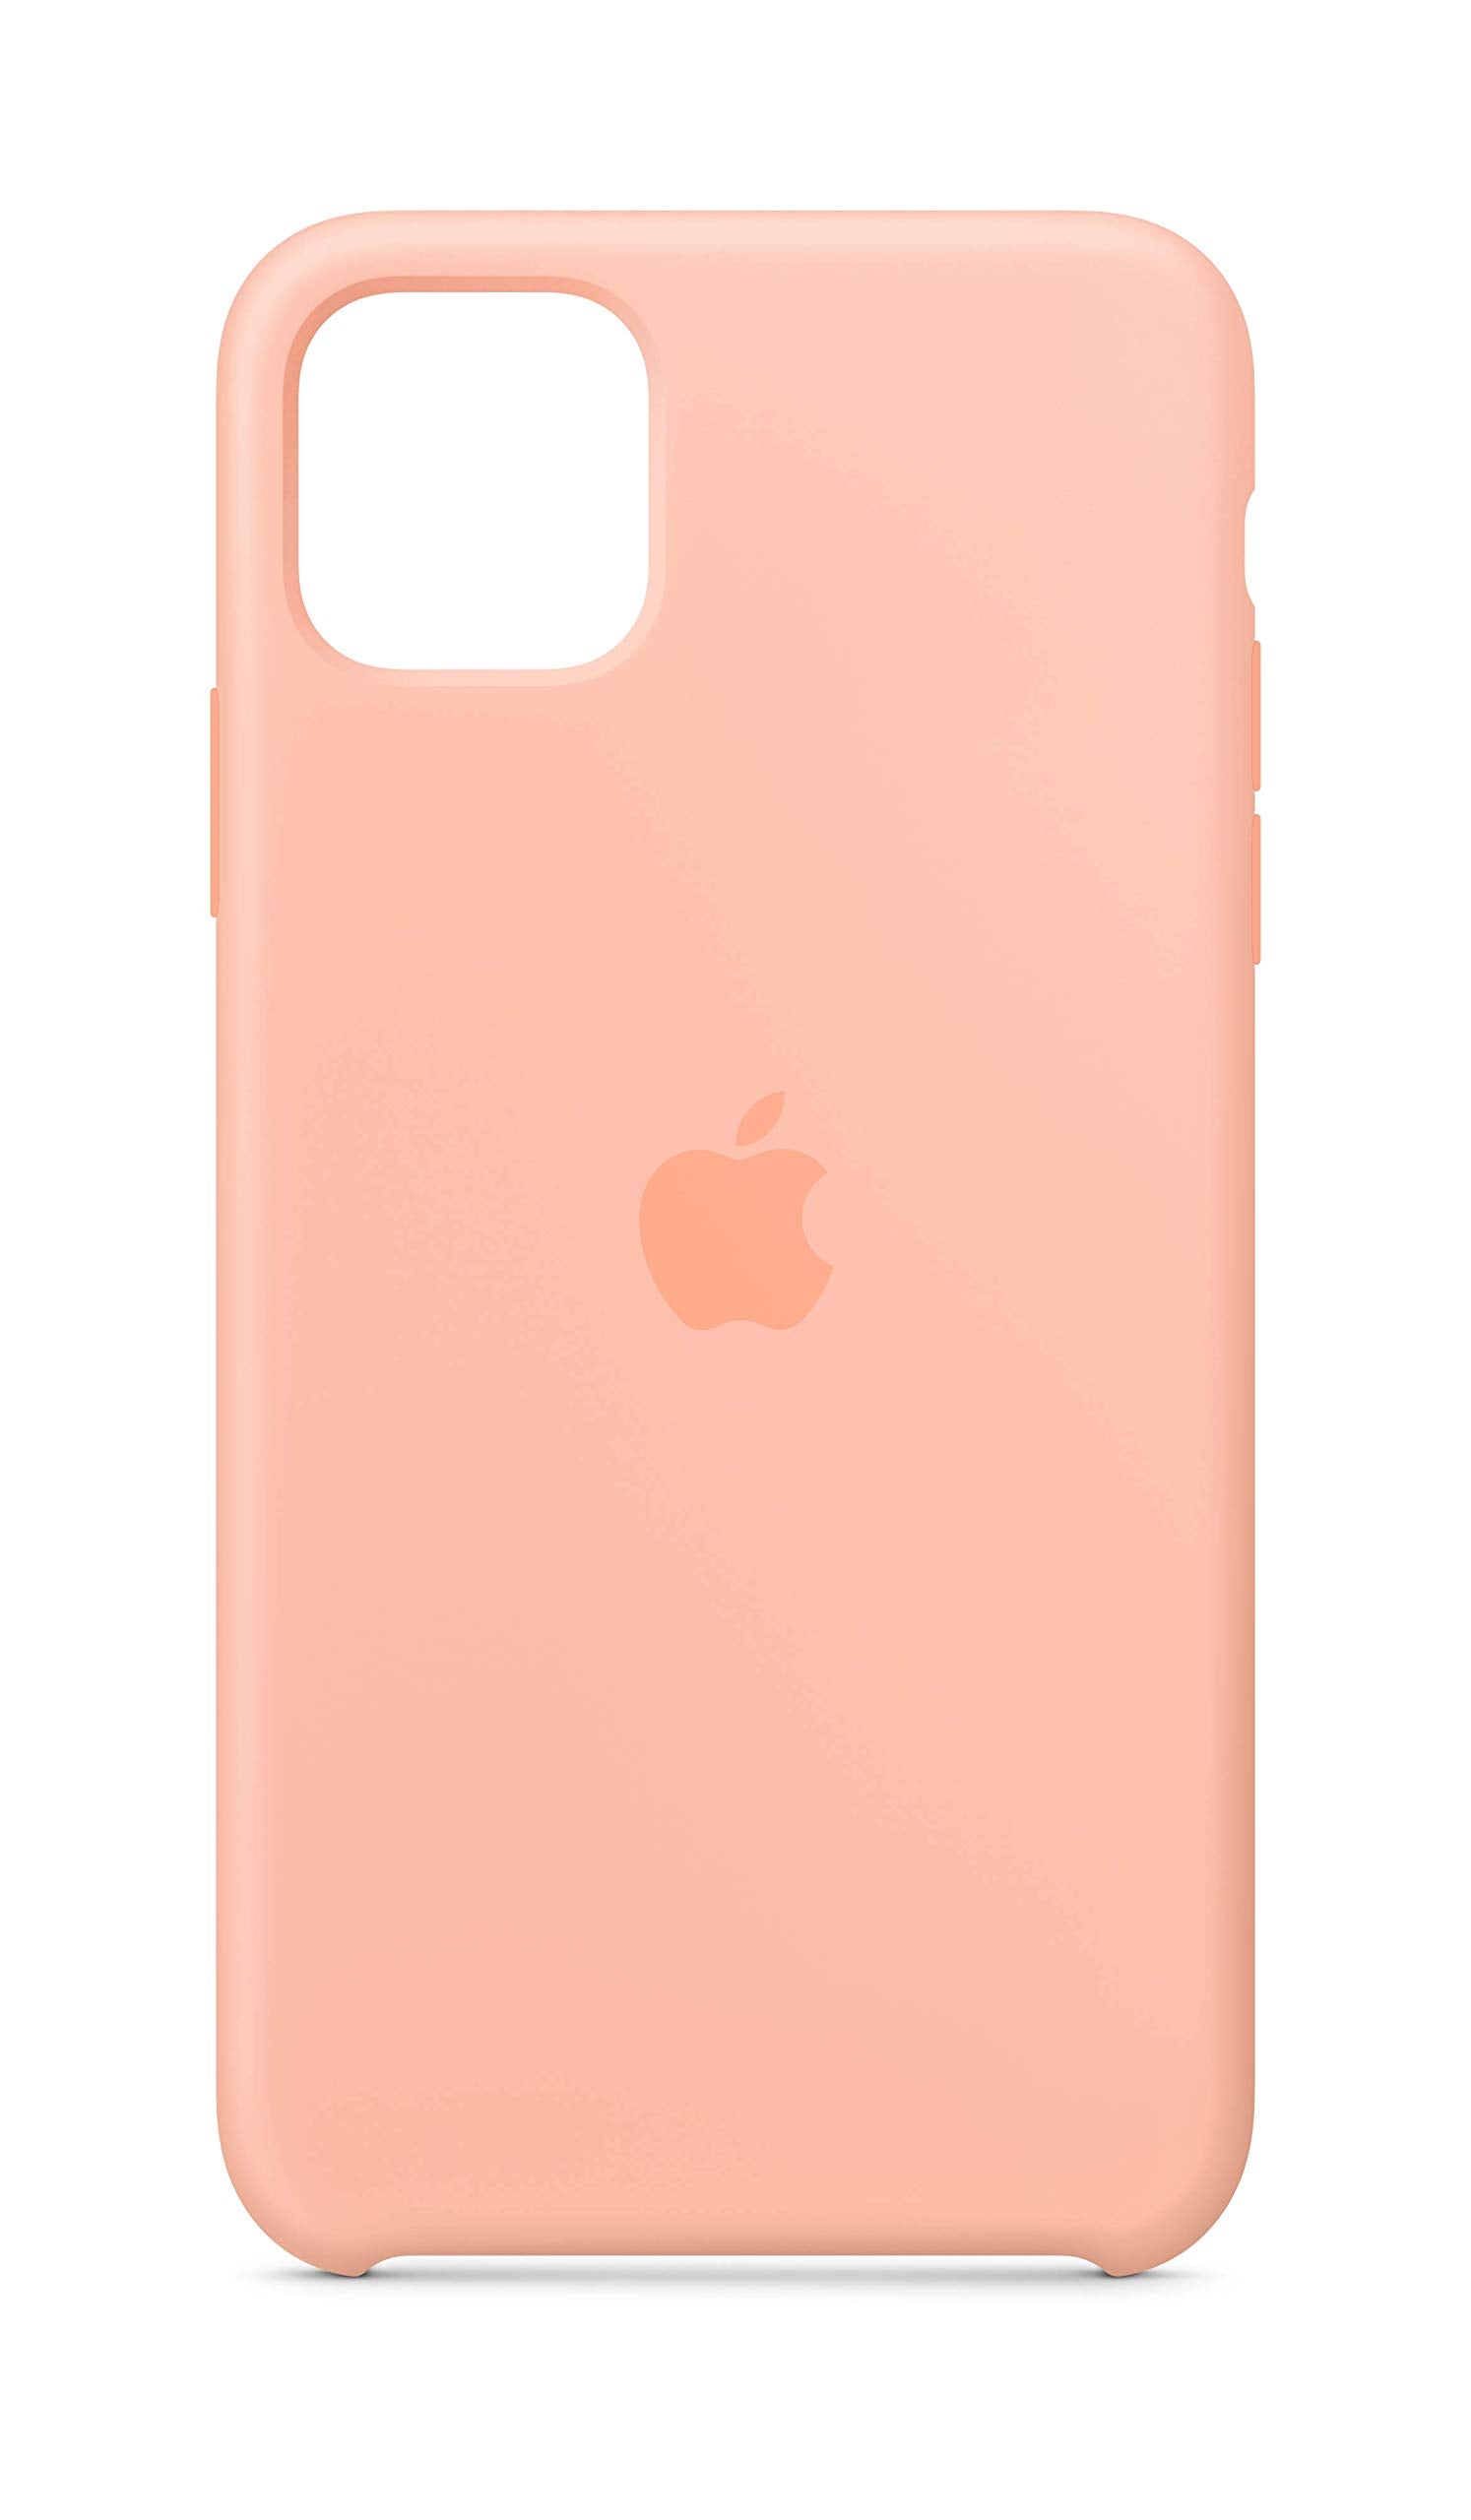 Apple Silicone Case (for iPhone 11 Pro Max) - Grapefruit